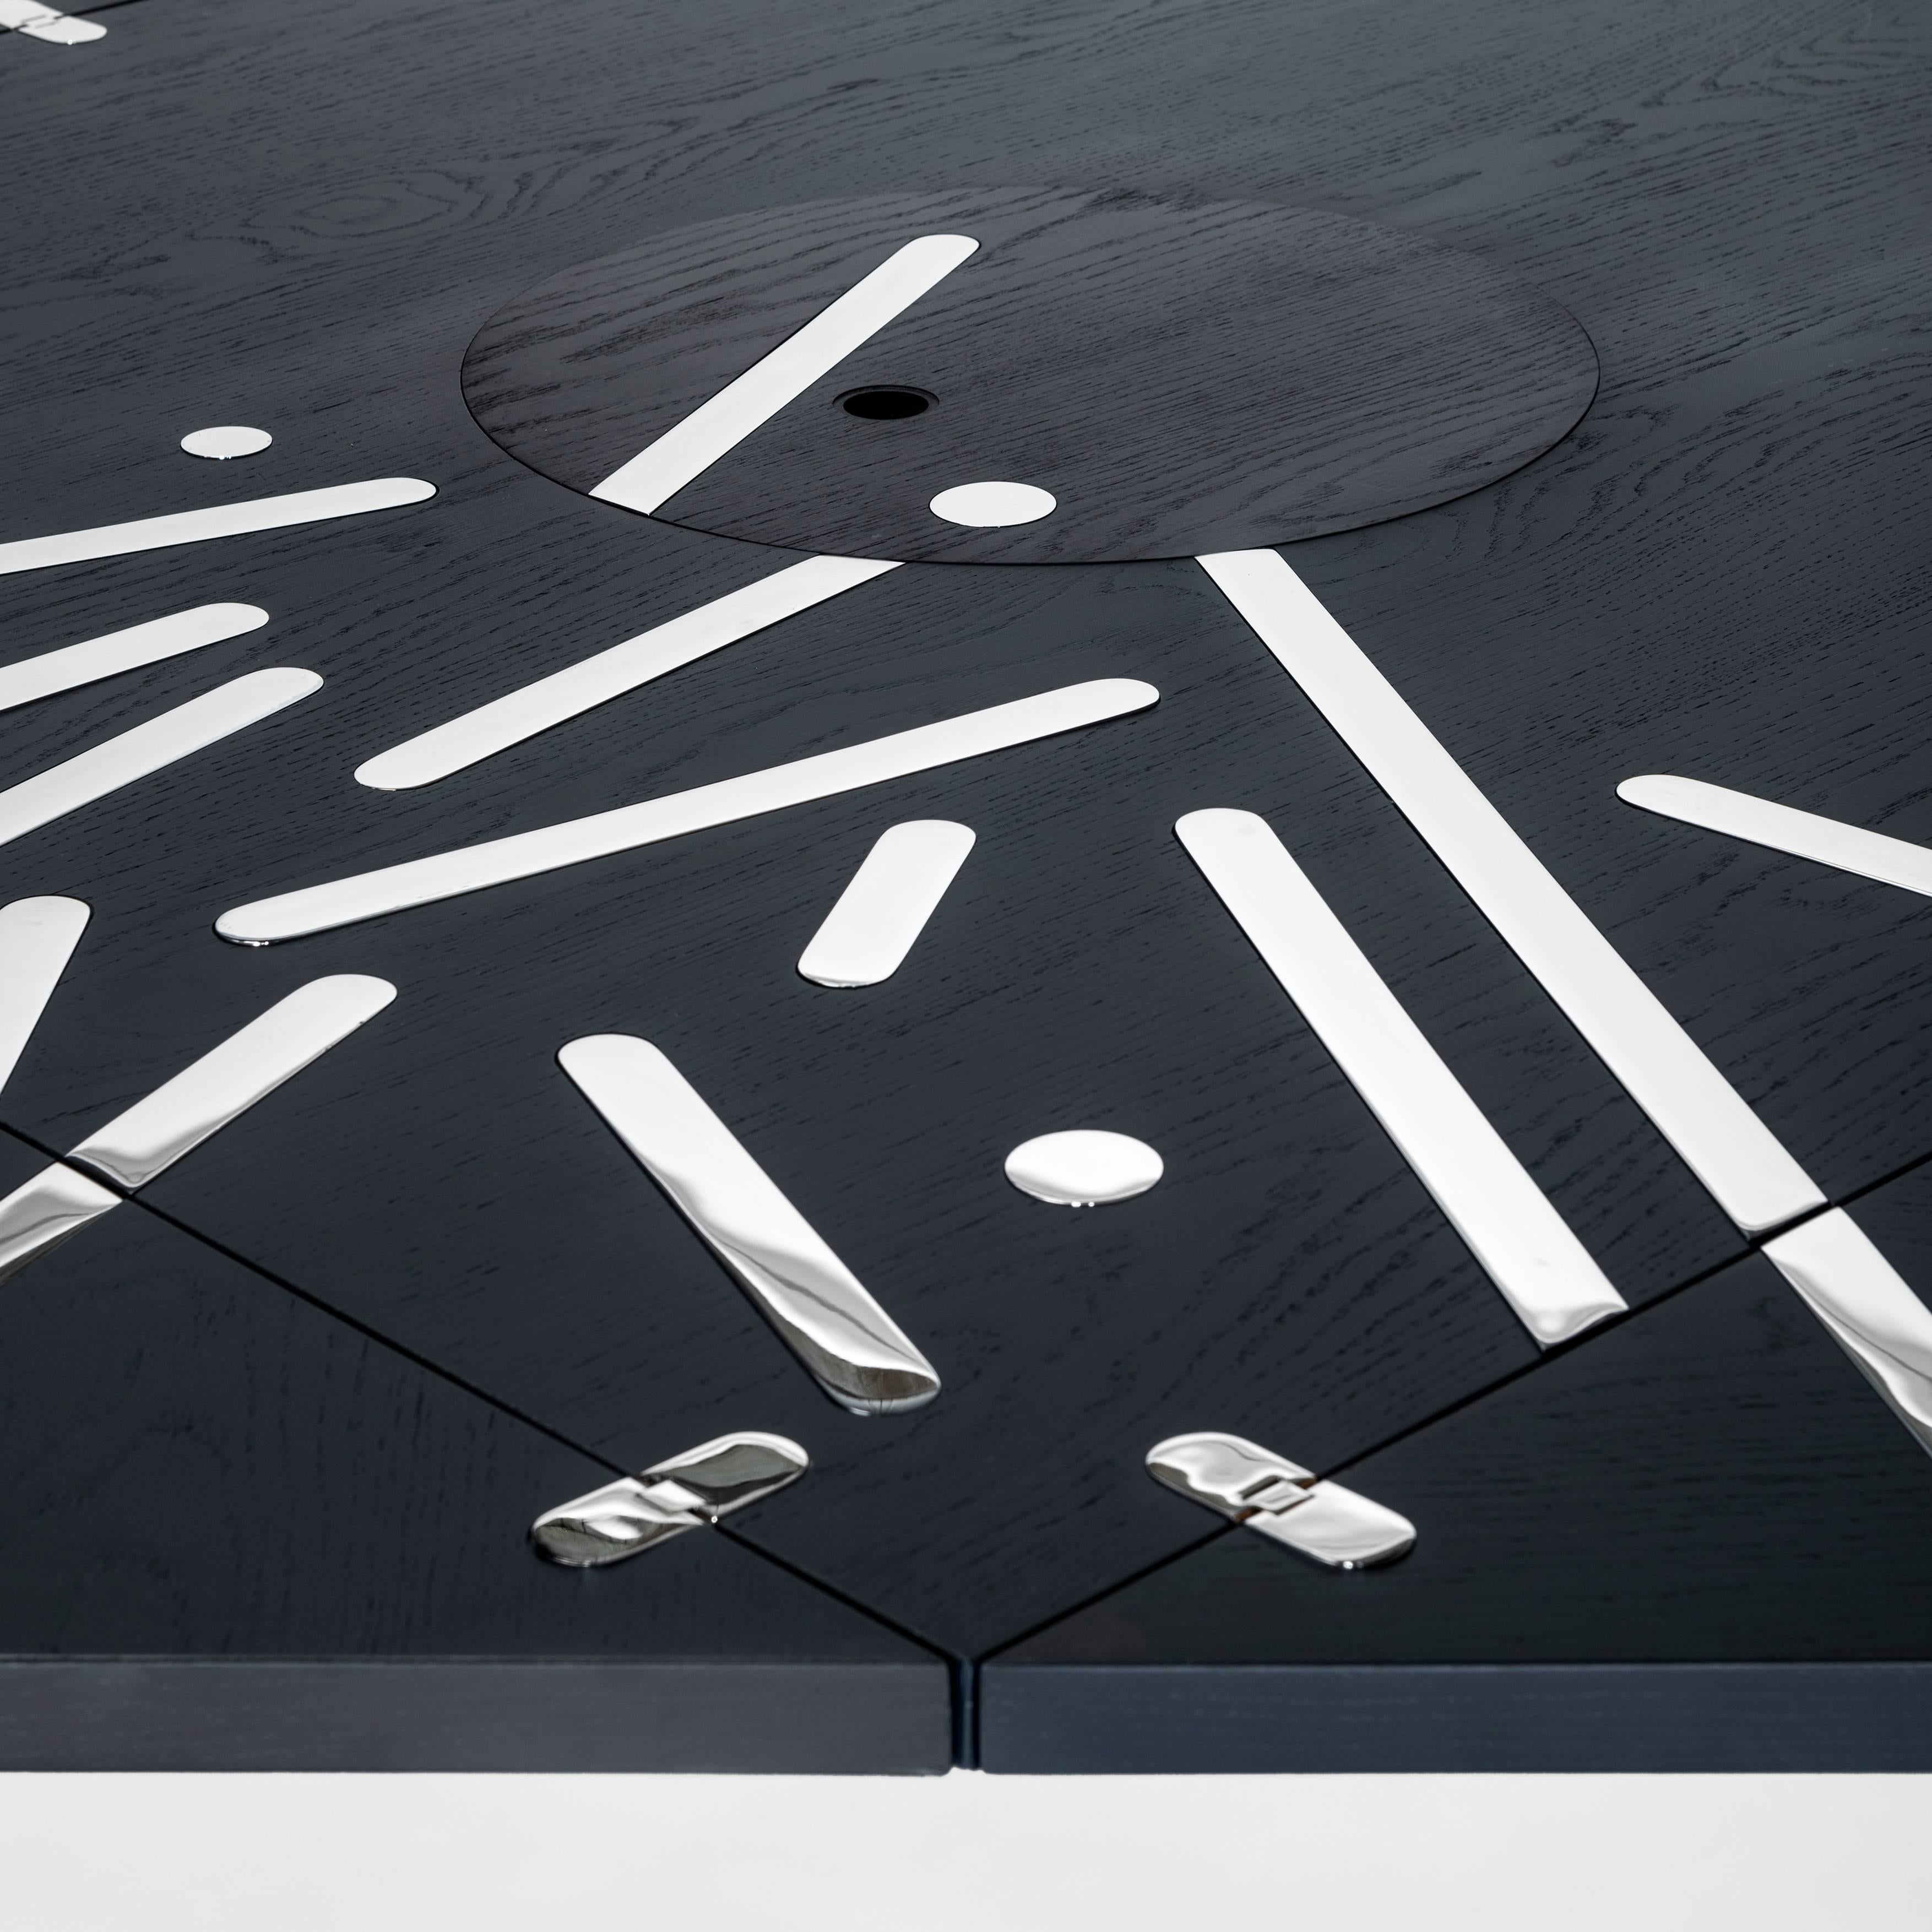 Limited Edition Alella Table by Lluís Clotet 2